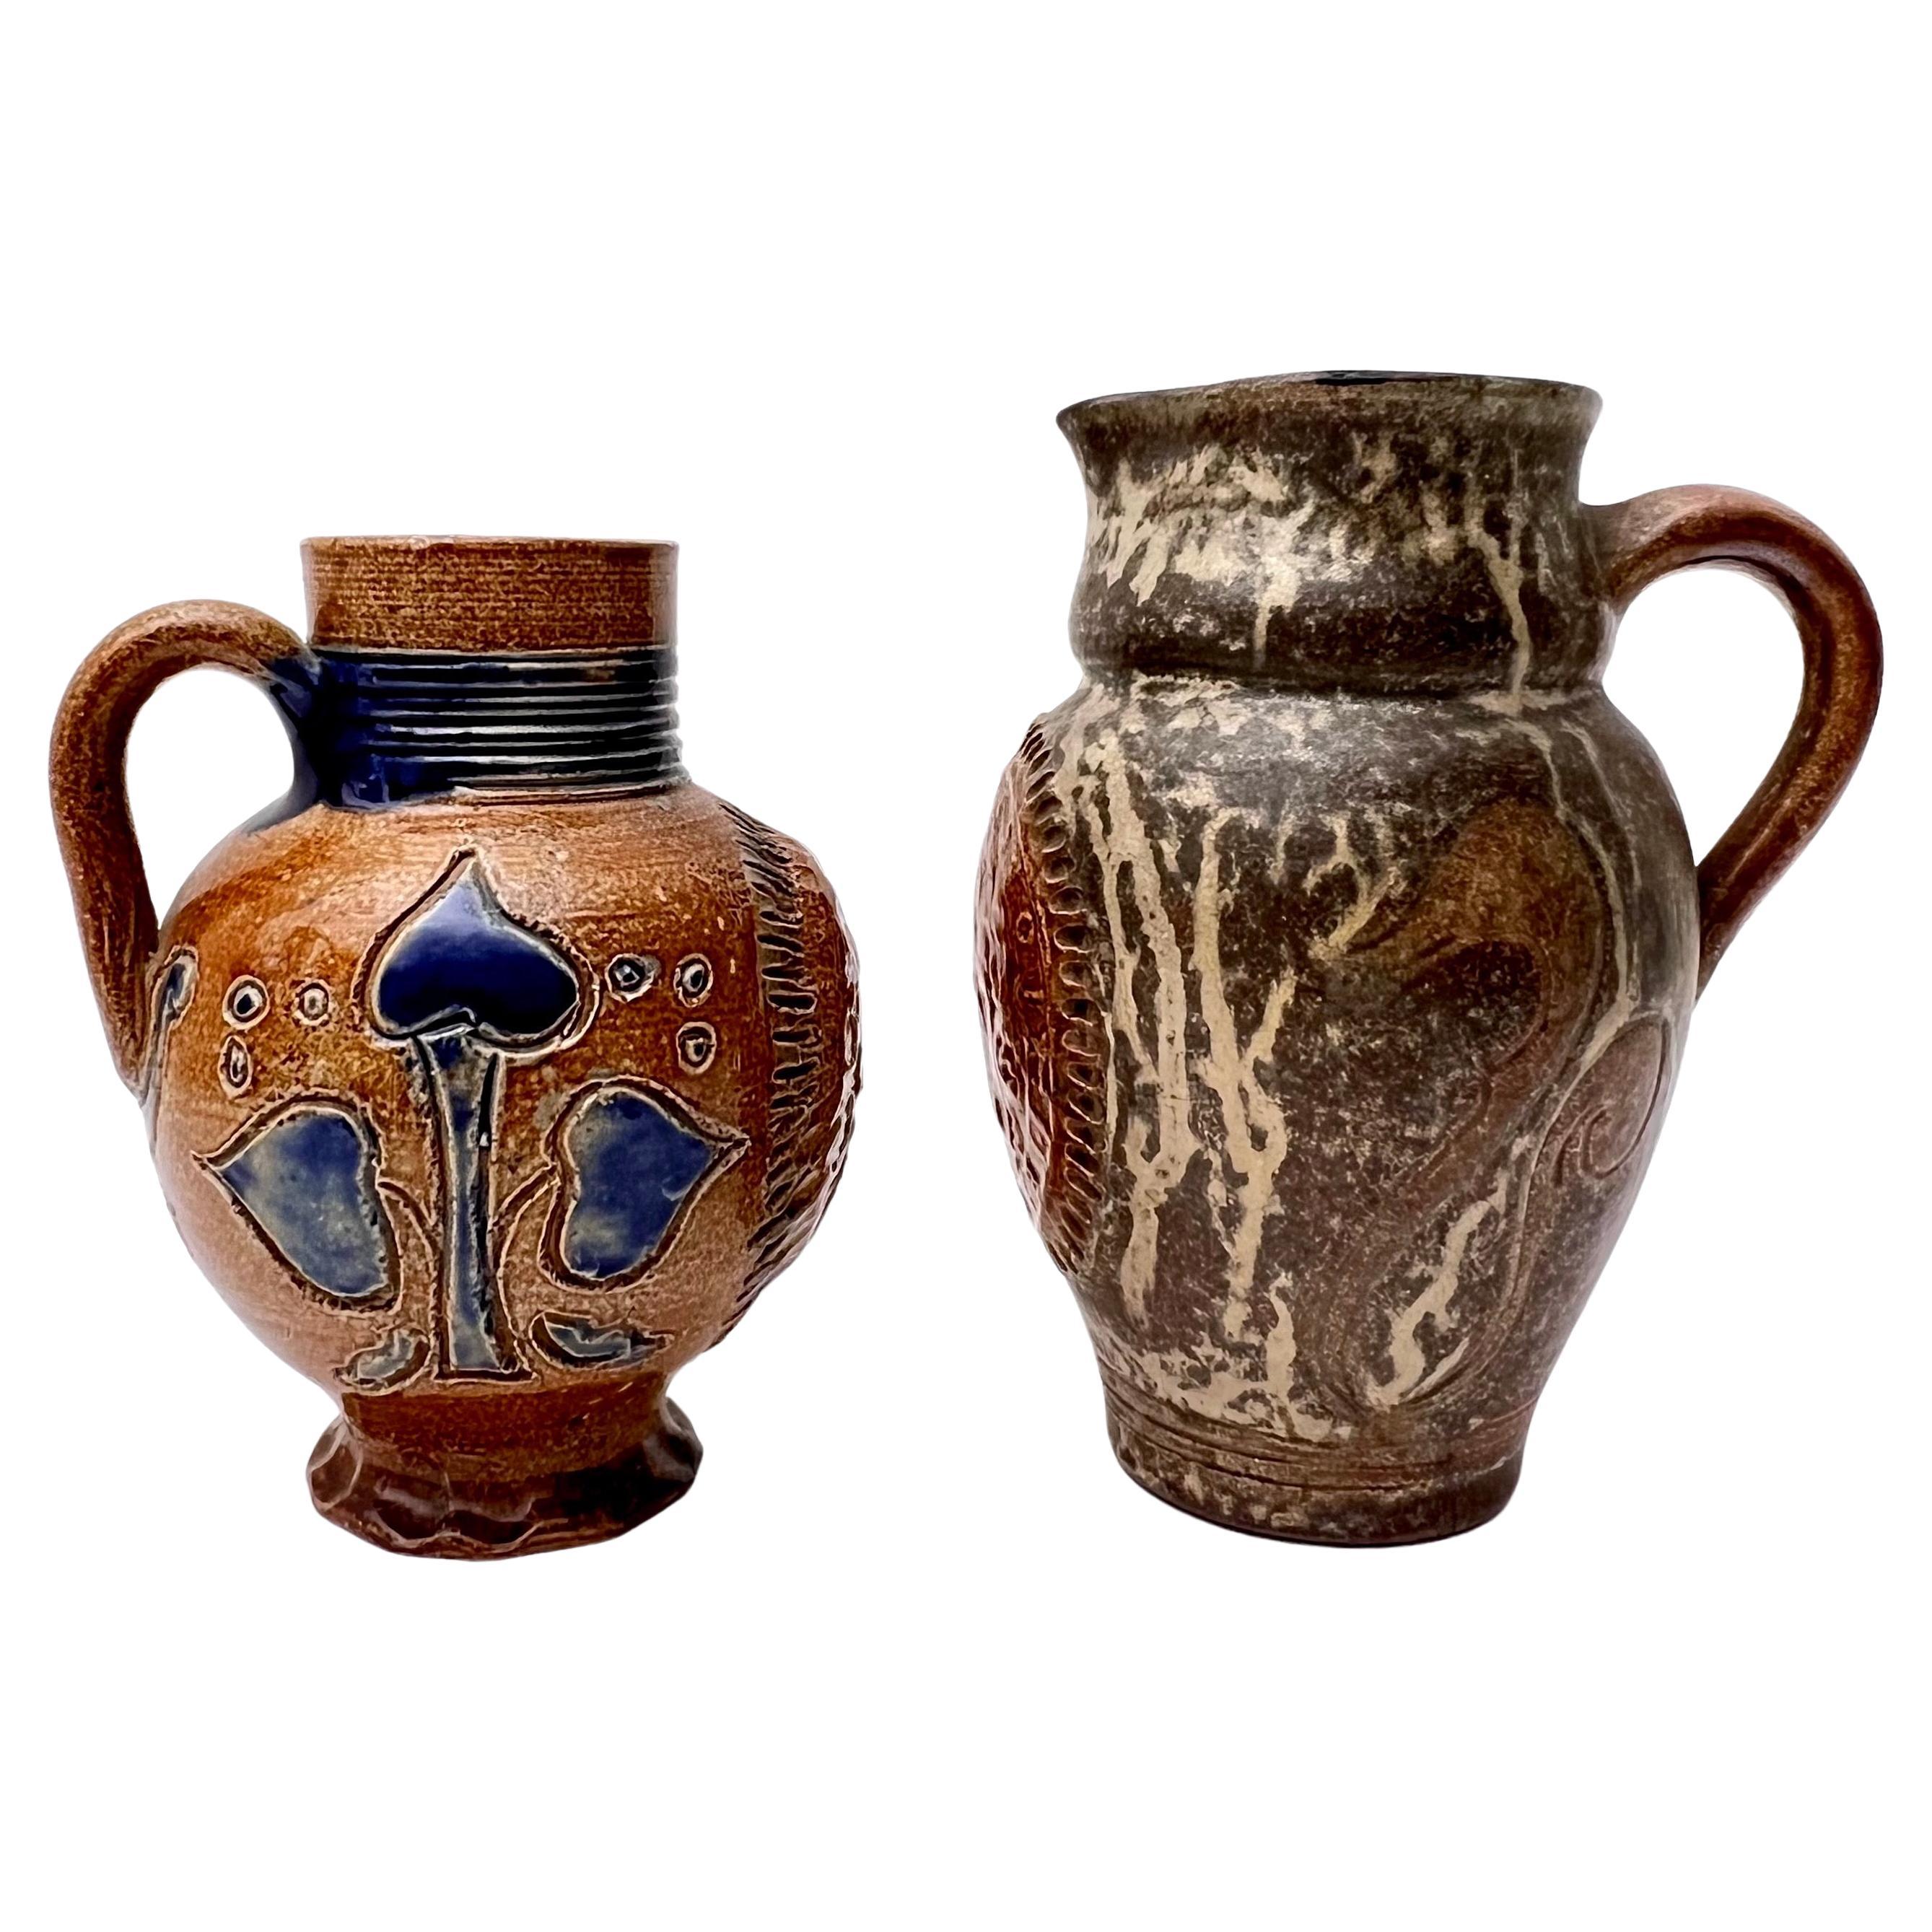 Great near pair of Roger Guerin pitcher and vase.  One is a pitcher and one is a handled vase. Each is stylized with a Belgium Crest or Coat of Arms in the front of the pitcher with decorative motifs along the sides.  Great for any collector of